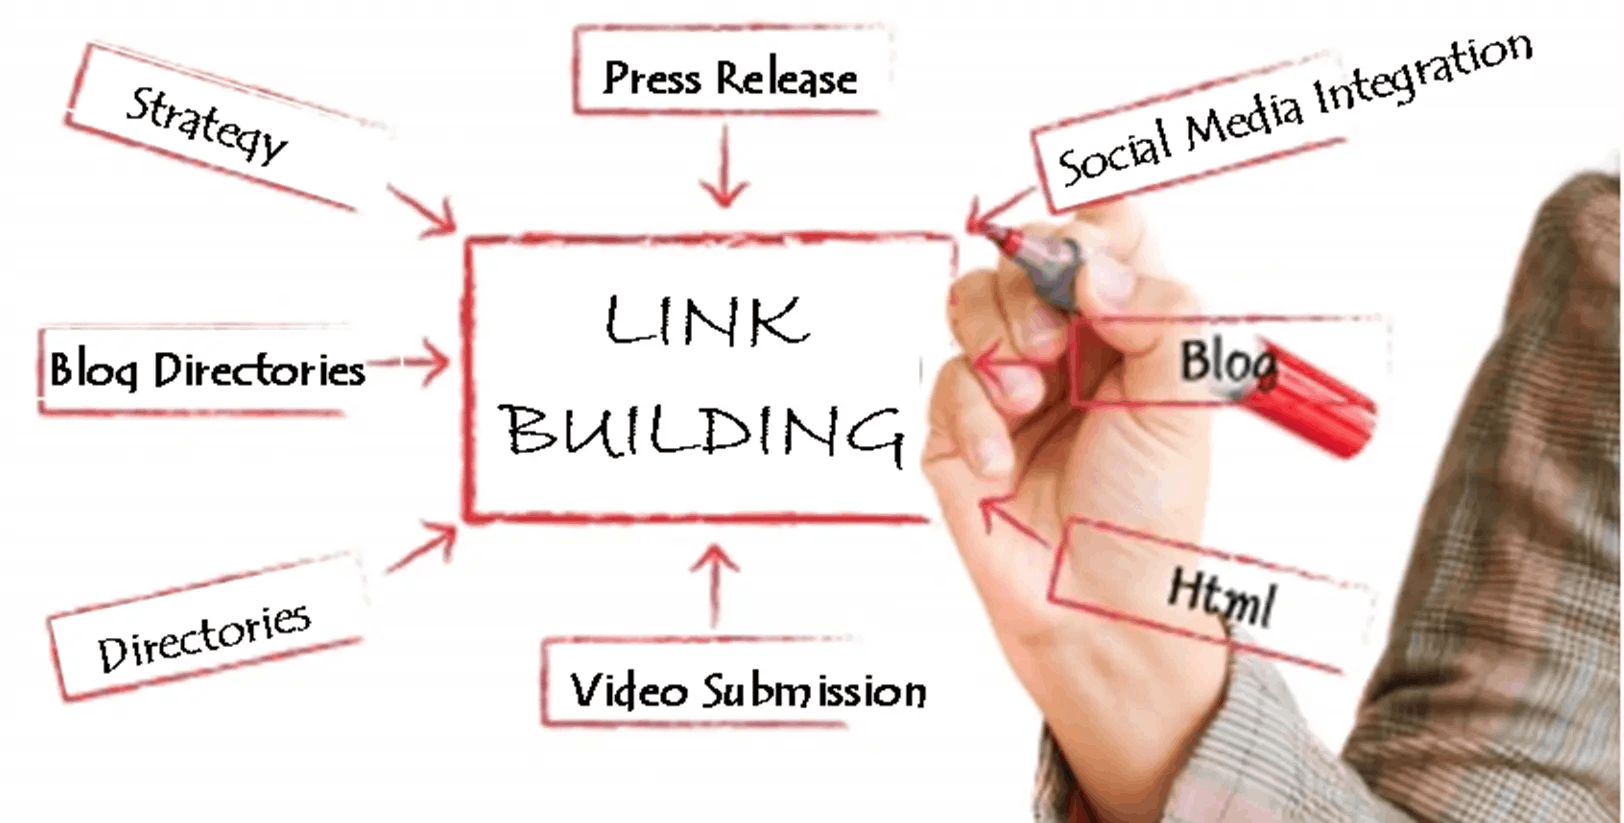 How do I buy backlinks? Get backlinks from different platforms as shown in the image